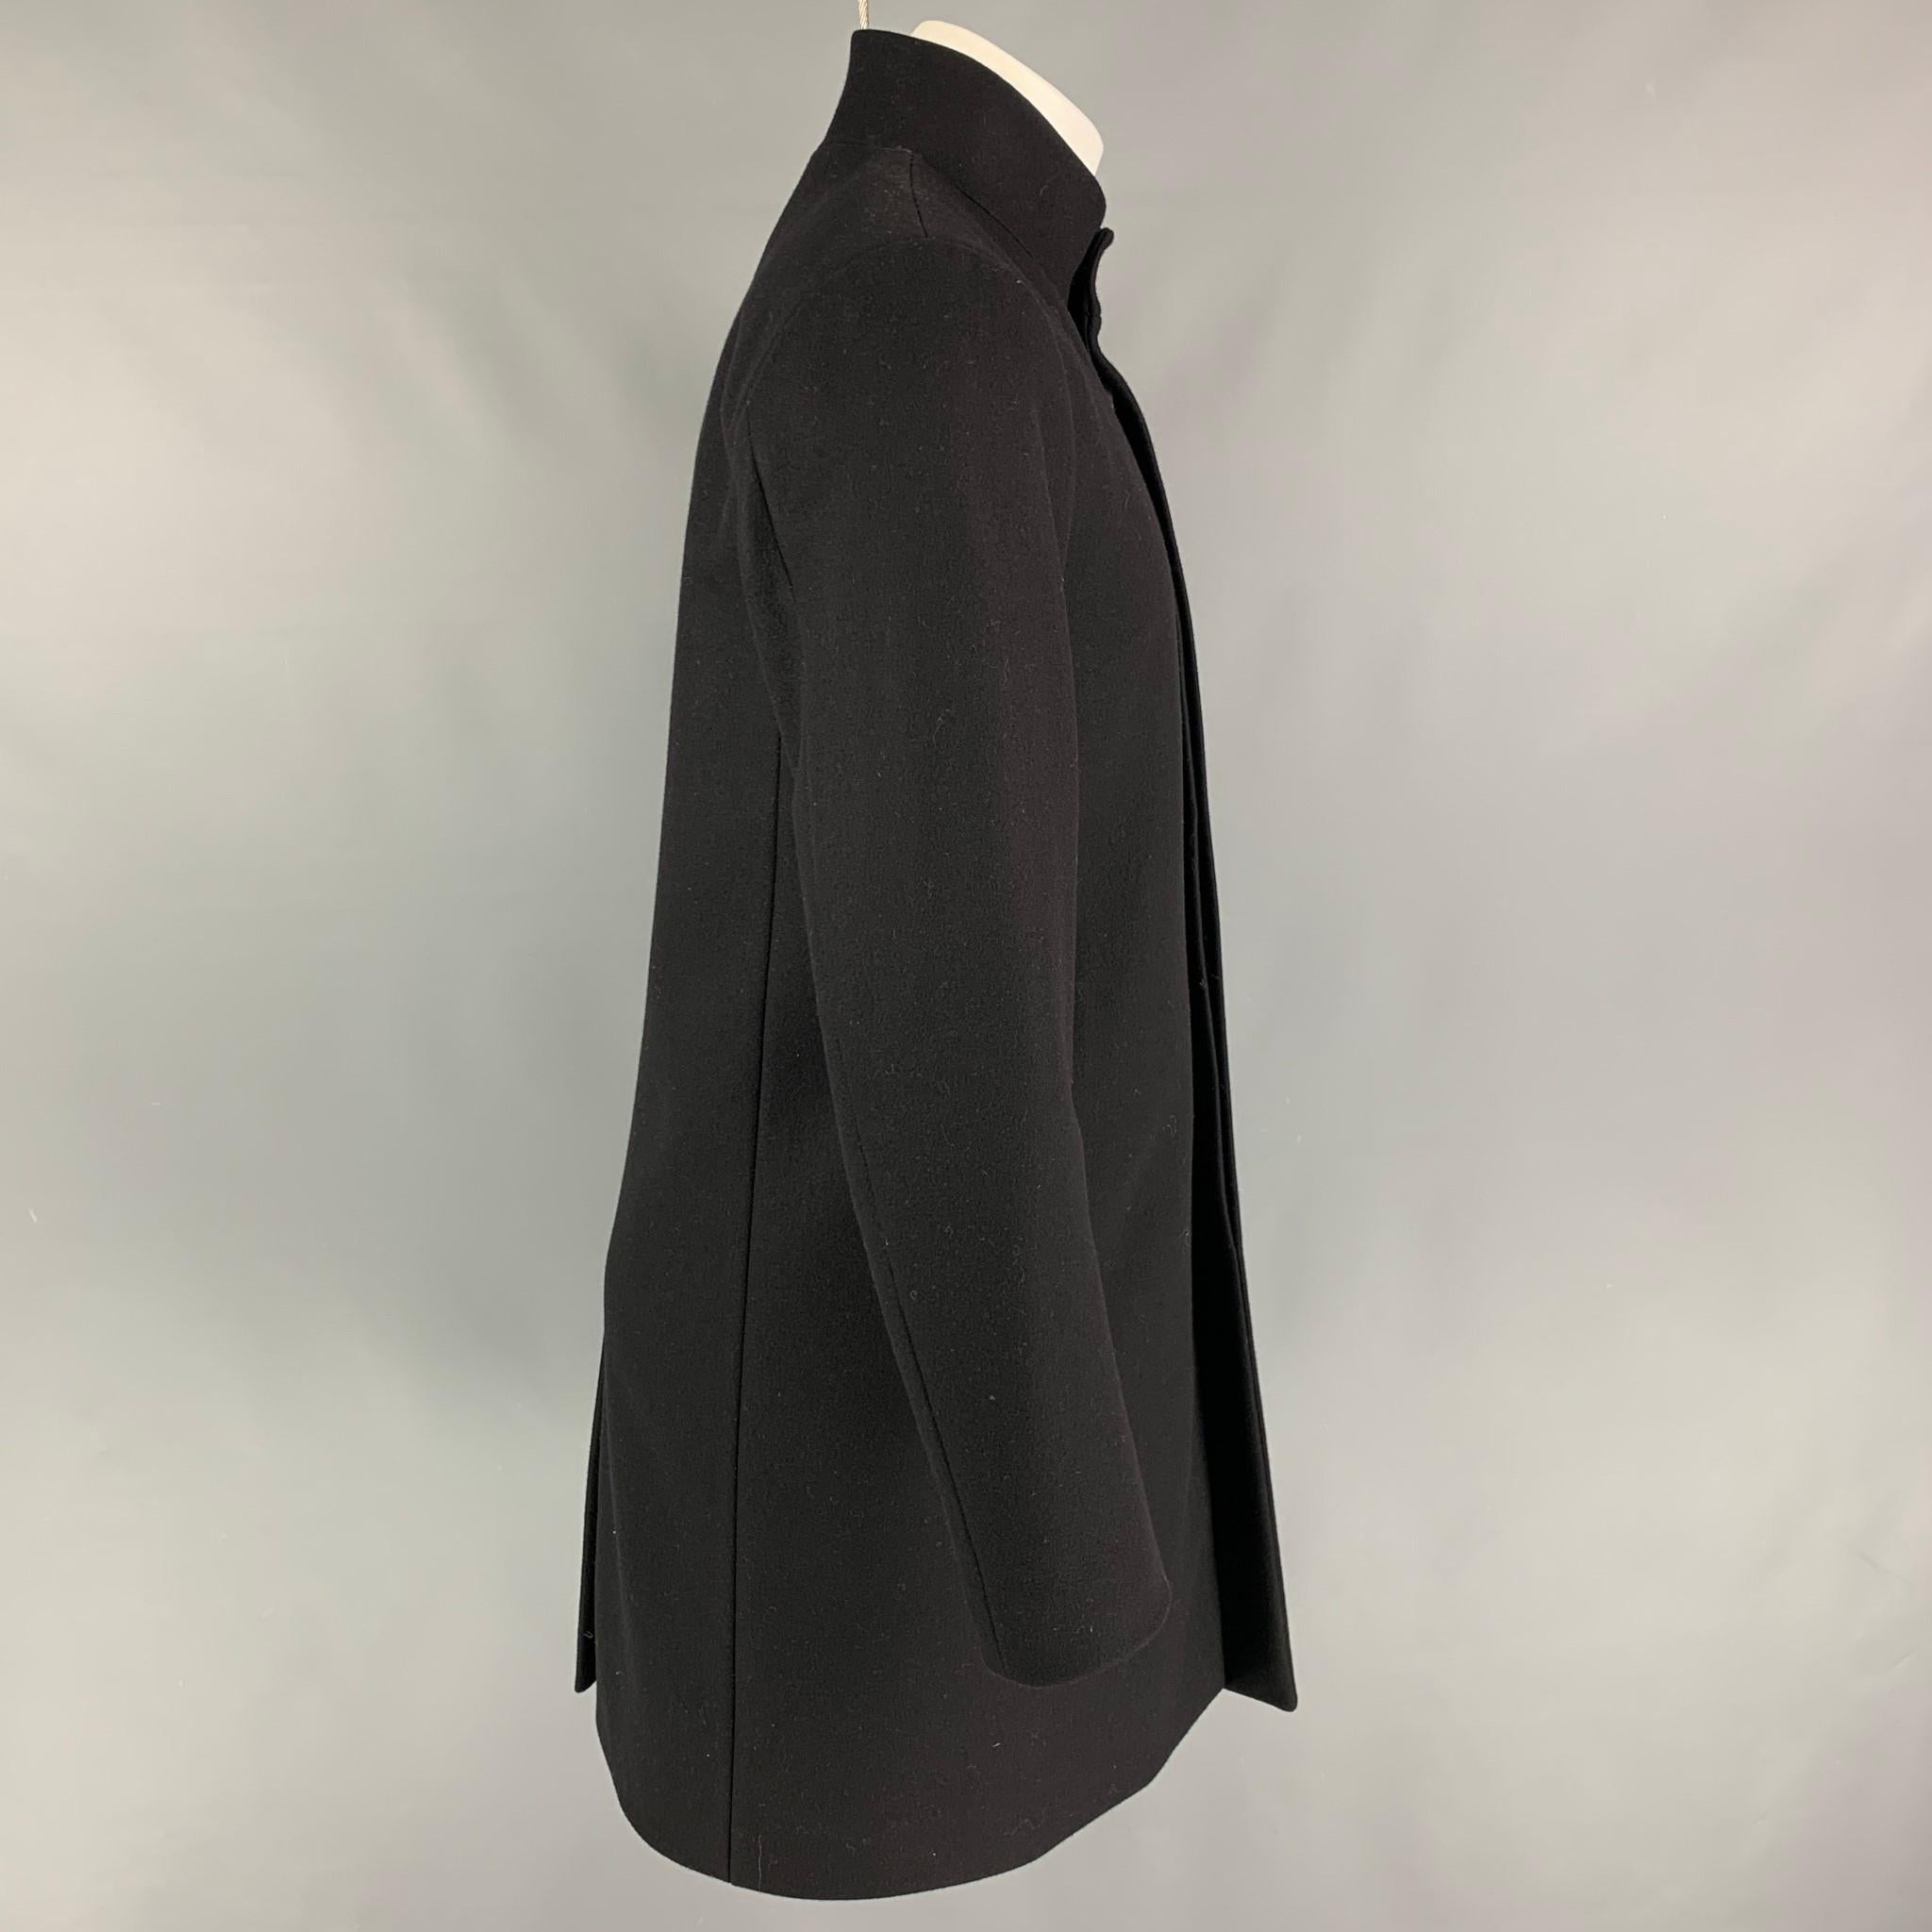 THEORY coat comes in a black wool blend with a full liner featuring a stand up collar, slit pockets, single back vent, and a hidden button closure. 

Very Good Pre-Owned Condition.
Marked: M
Original Retail Price: $849.00

Measurements:

Shoulder: